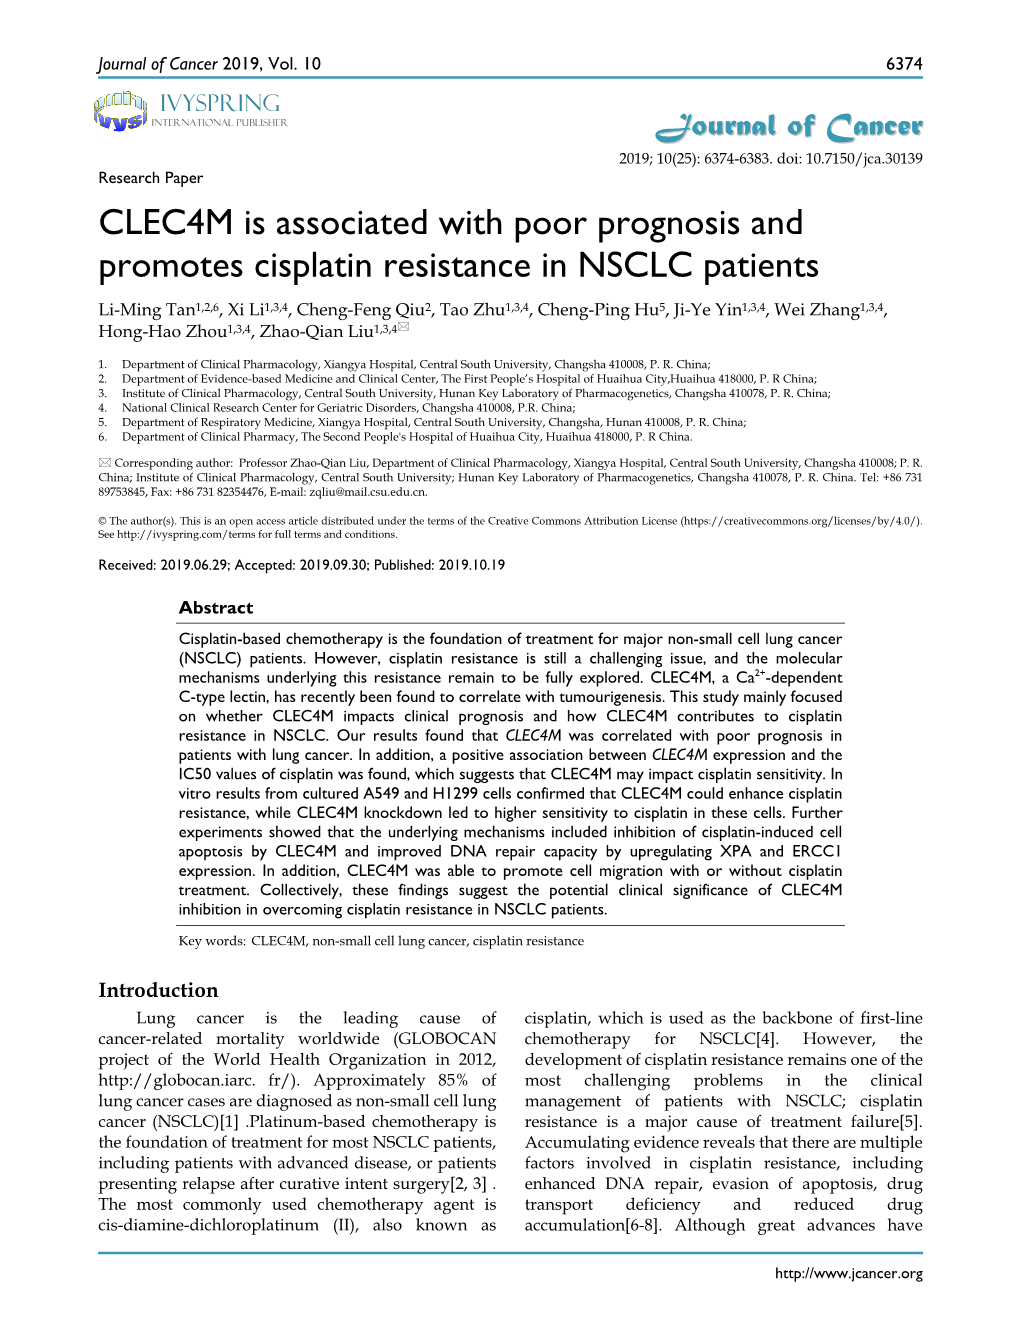 CLEC4M Is Associated with Poor Prognosis and Promotes Cisplatin Resistance in NSCLC Patients